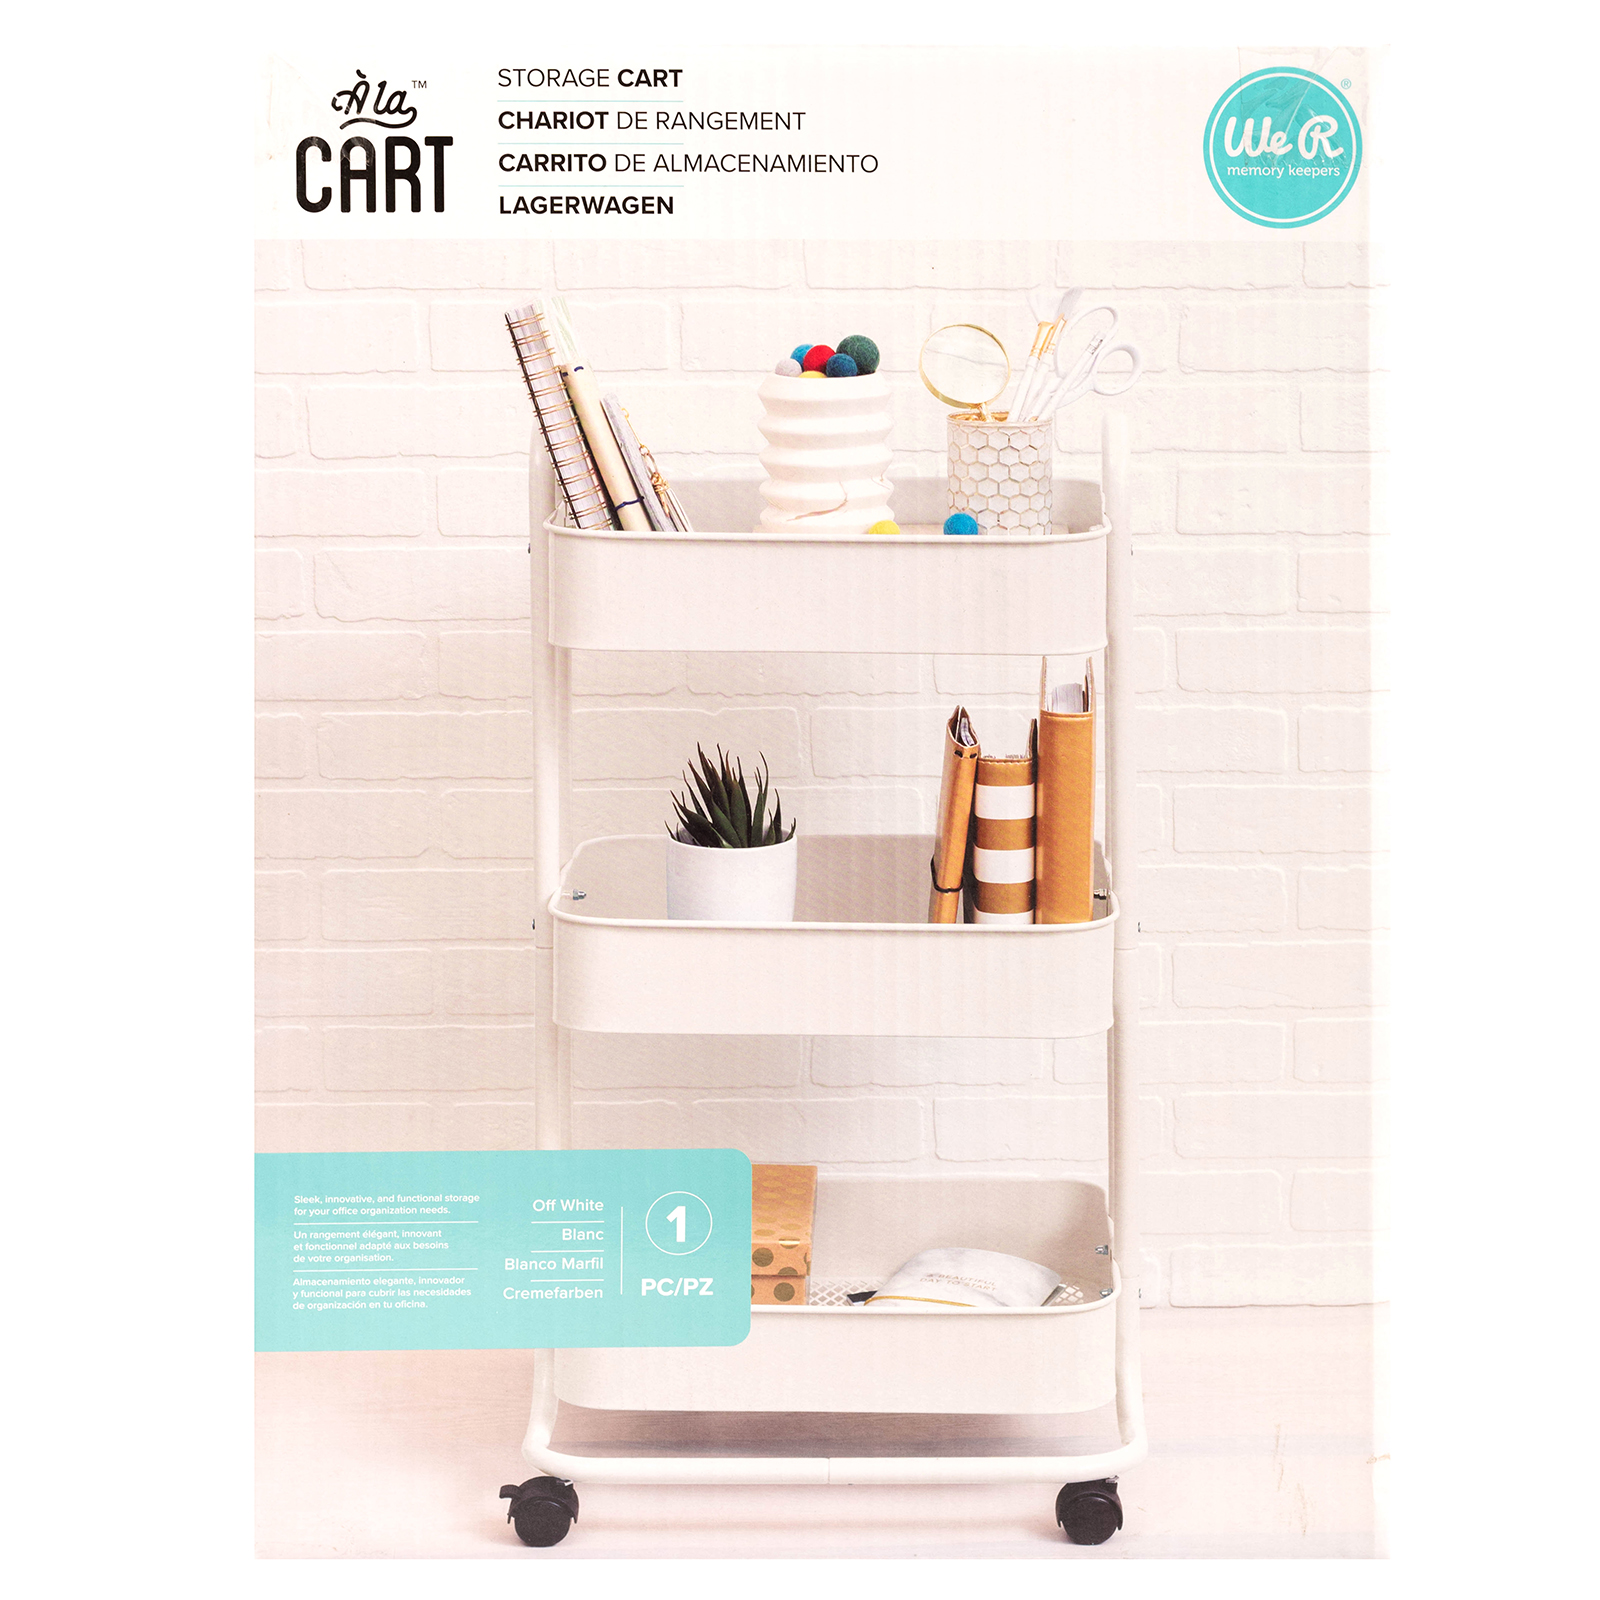 3-Tier Steel Rolling Storage Cart, 36 1/2" x 17" x 17", With Handles, Off White - image 2 of 4